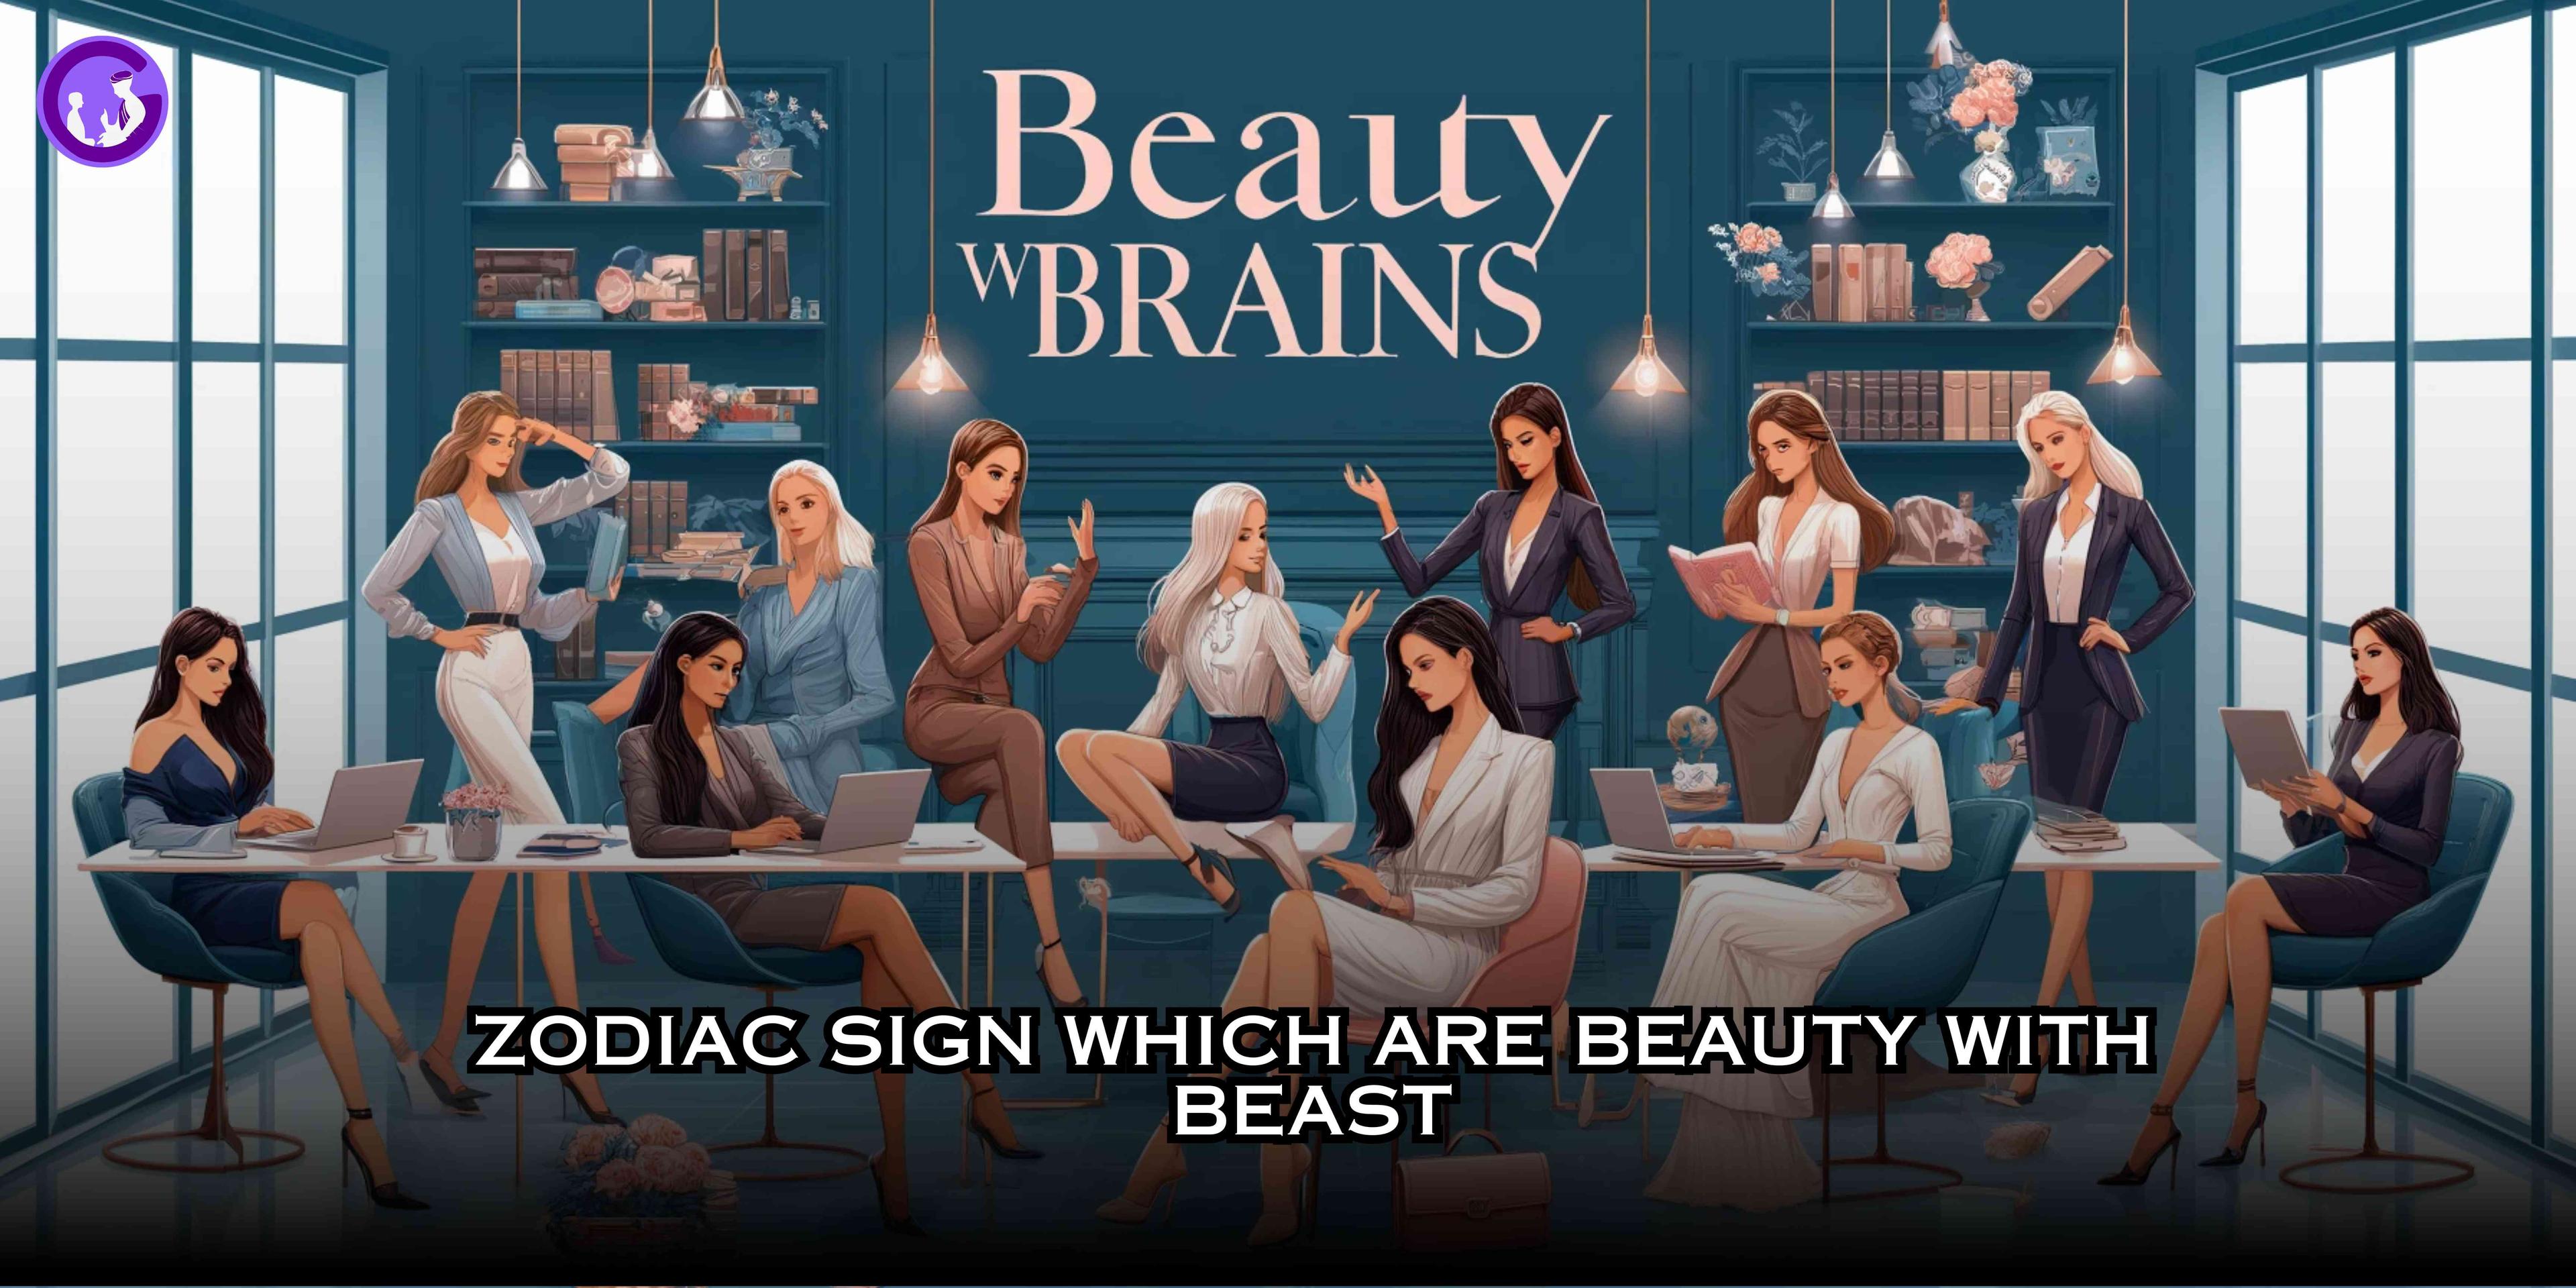 4 Zodiac Signs Known for Beauty and Intelligence